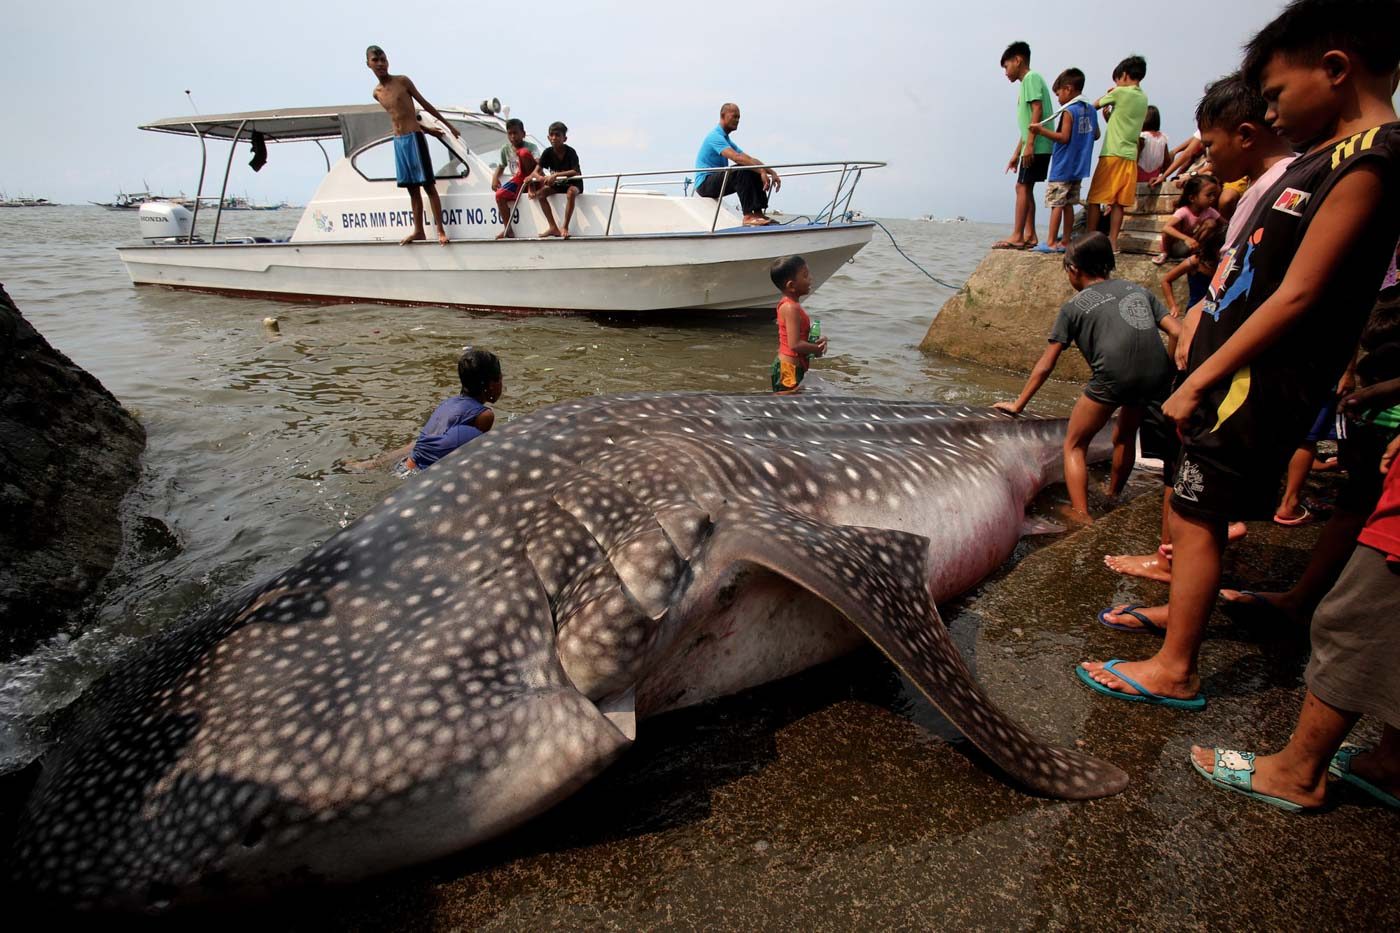 Dead whale shark spotted in Cavite waters